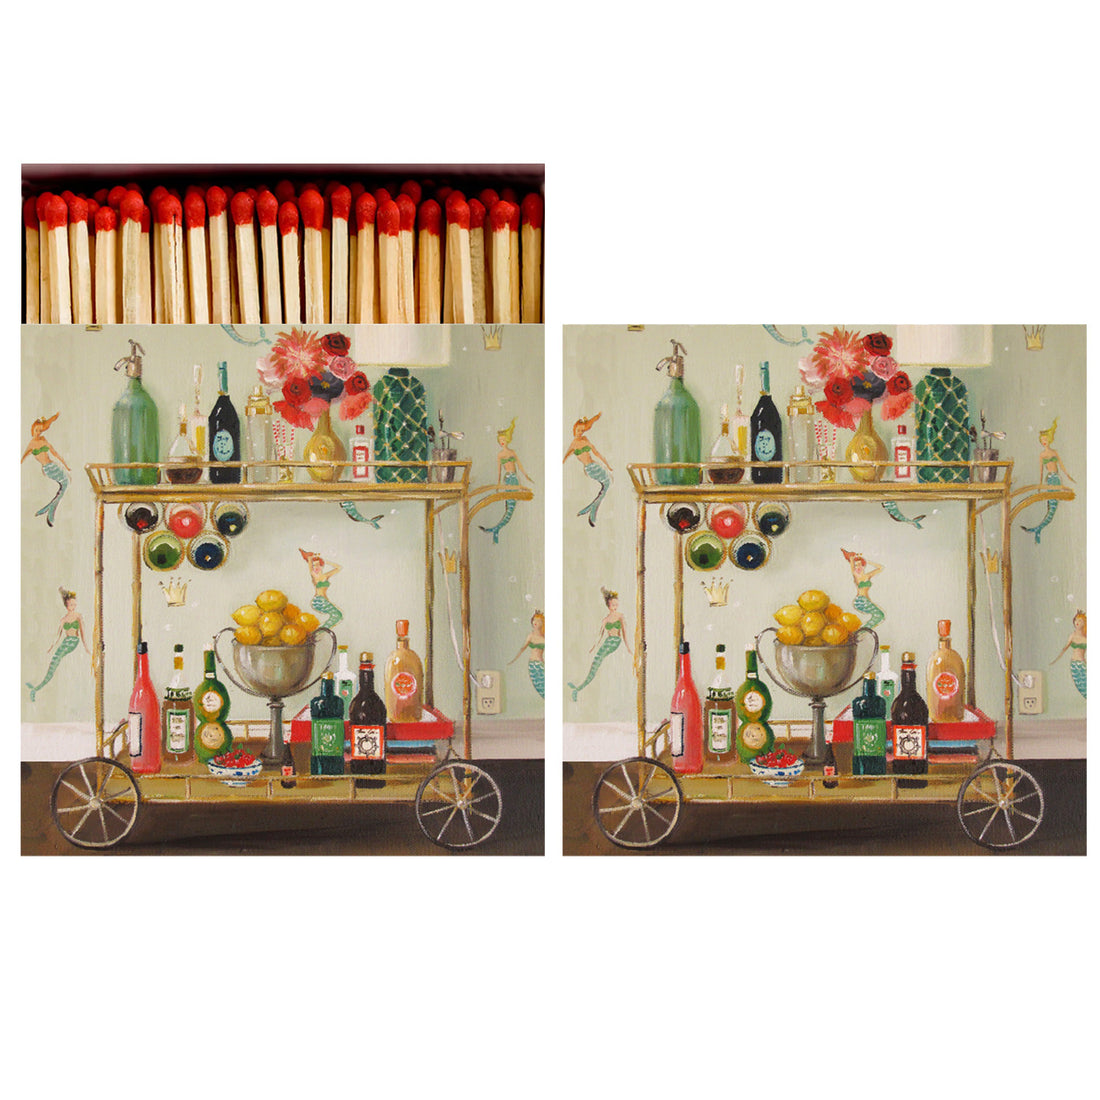 Two identical sides of a square match box, the left of which is open slightly to reveal the matches inside. The artwork on the box depicts a stylized illustration of a mobile bar cart with an assortment of beverages, standing out against a mermaid-themed wallpaper. 